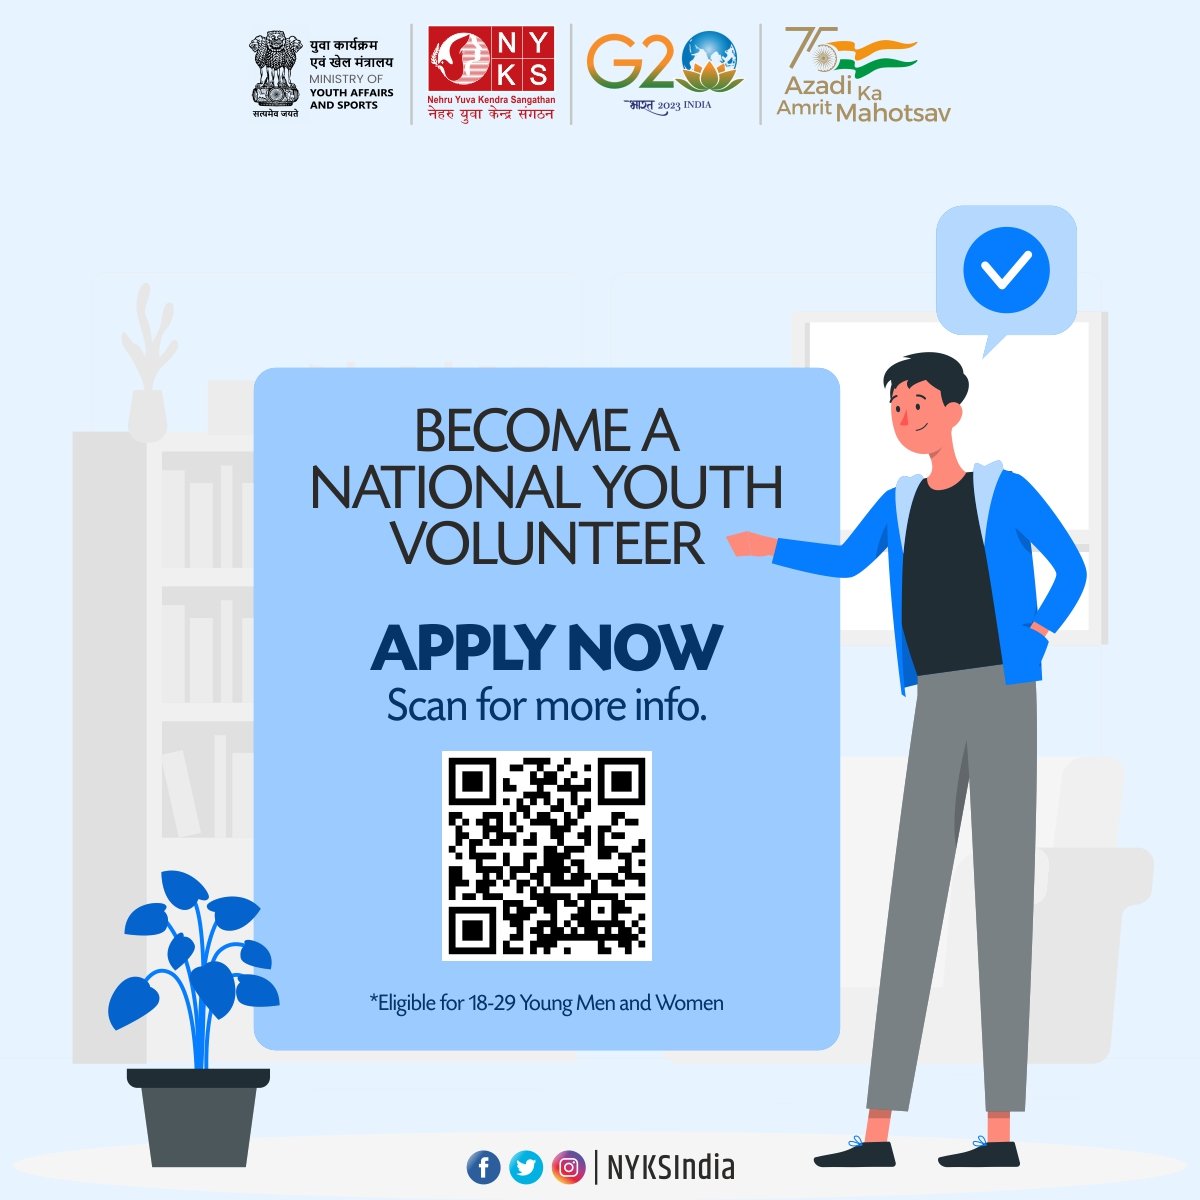 Become a National Youth Volunteer and change the destiny of the Nation.

Eligible for 18-29 Young Men and Women. 

For more information connect with your nearest NYK district offices. 
or Scan the QR code.

#NYV #youthvolunteer #NyksIndia #youth #India #registrationopen